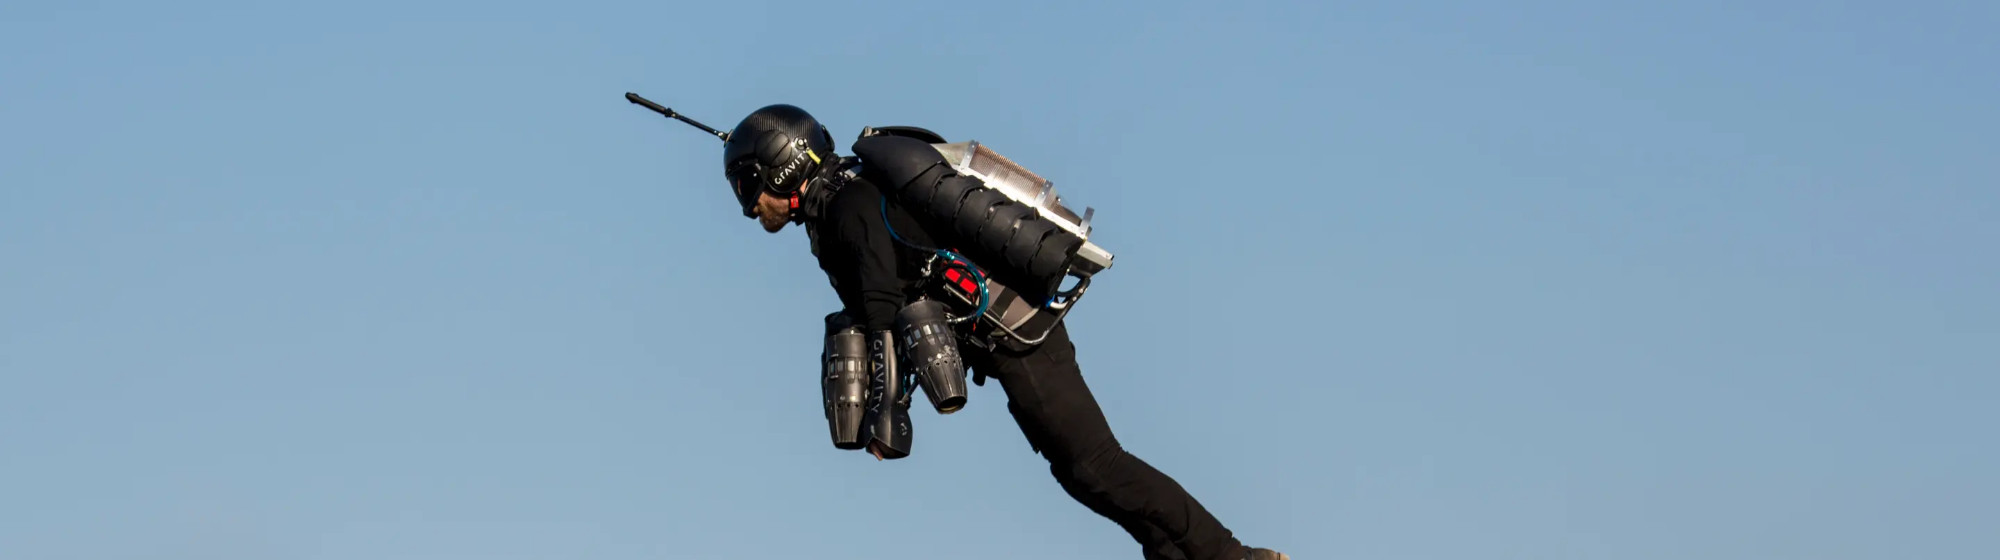 Jet pack exercise from Gravity Industries